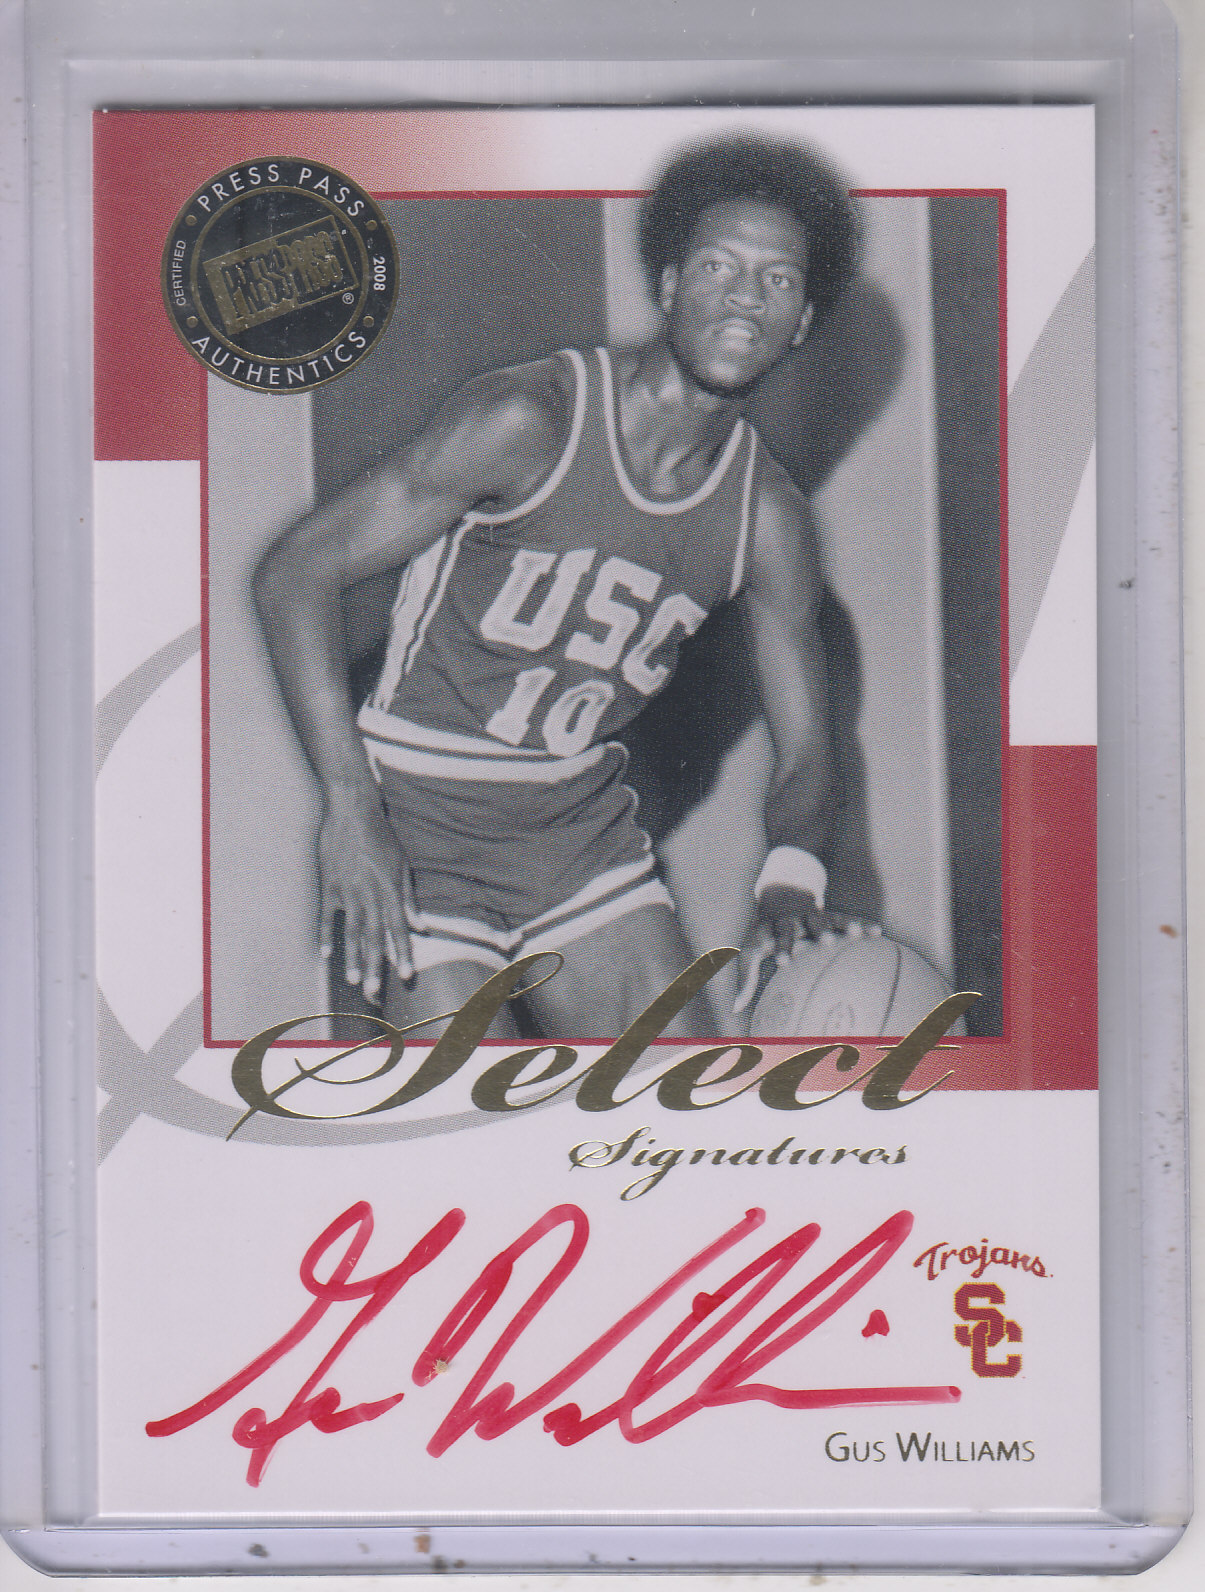 2008-09 Press Pass Legends Select Signatures #GW2 Gus Williams Red/125*